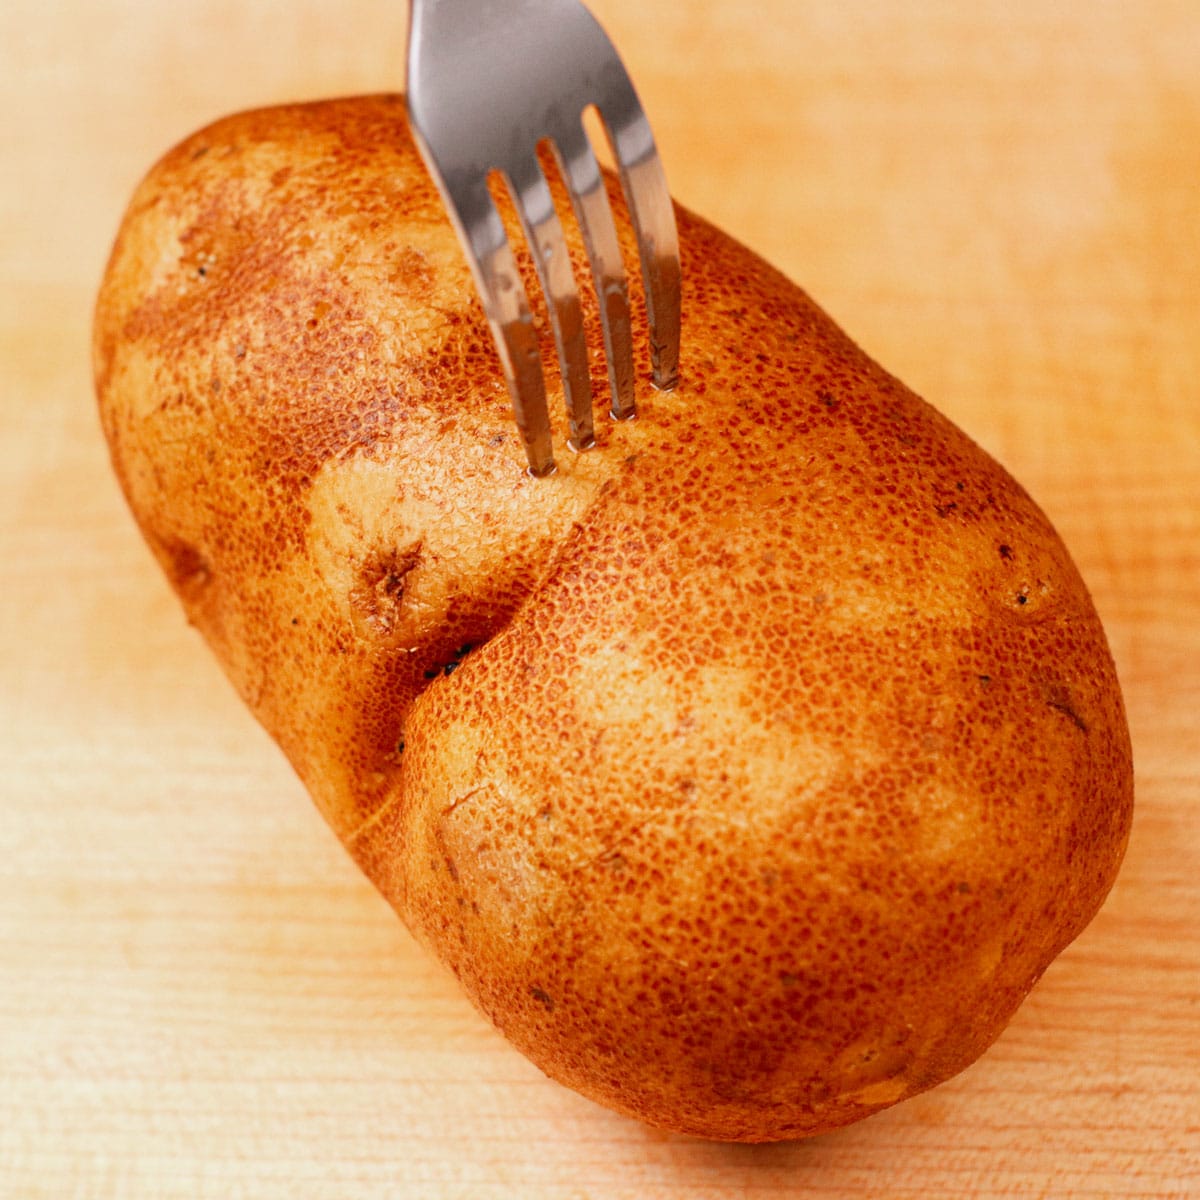 Pricking potato with fork to prevent steam from building up